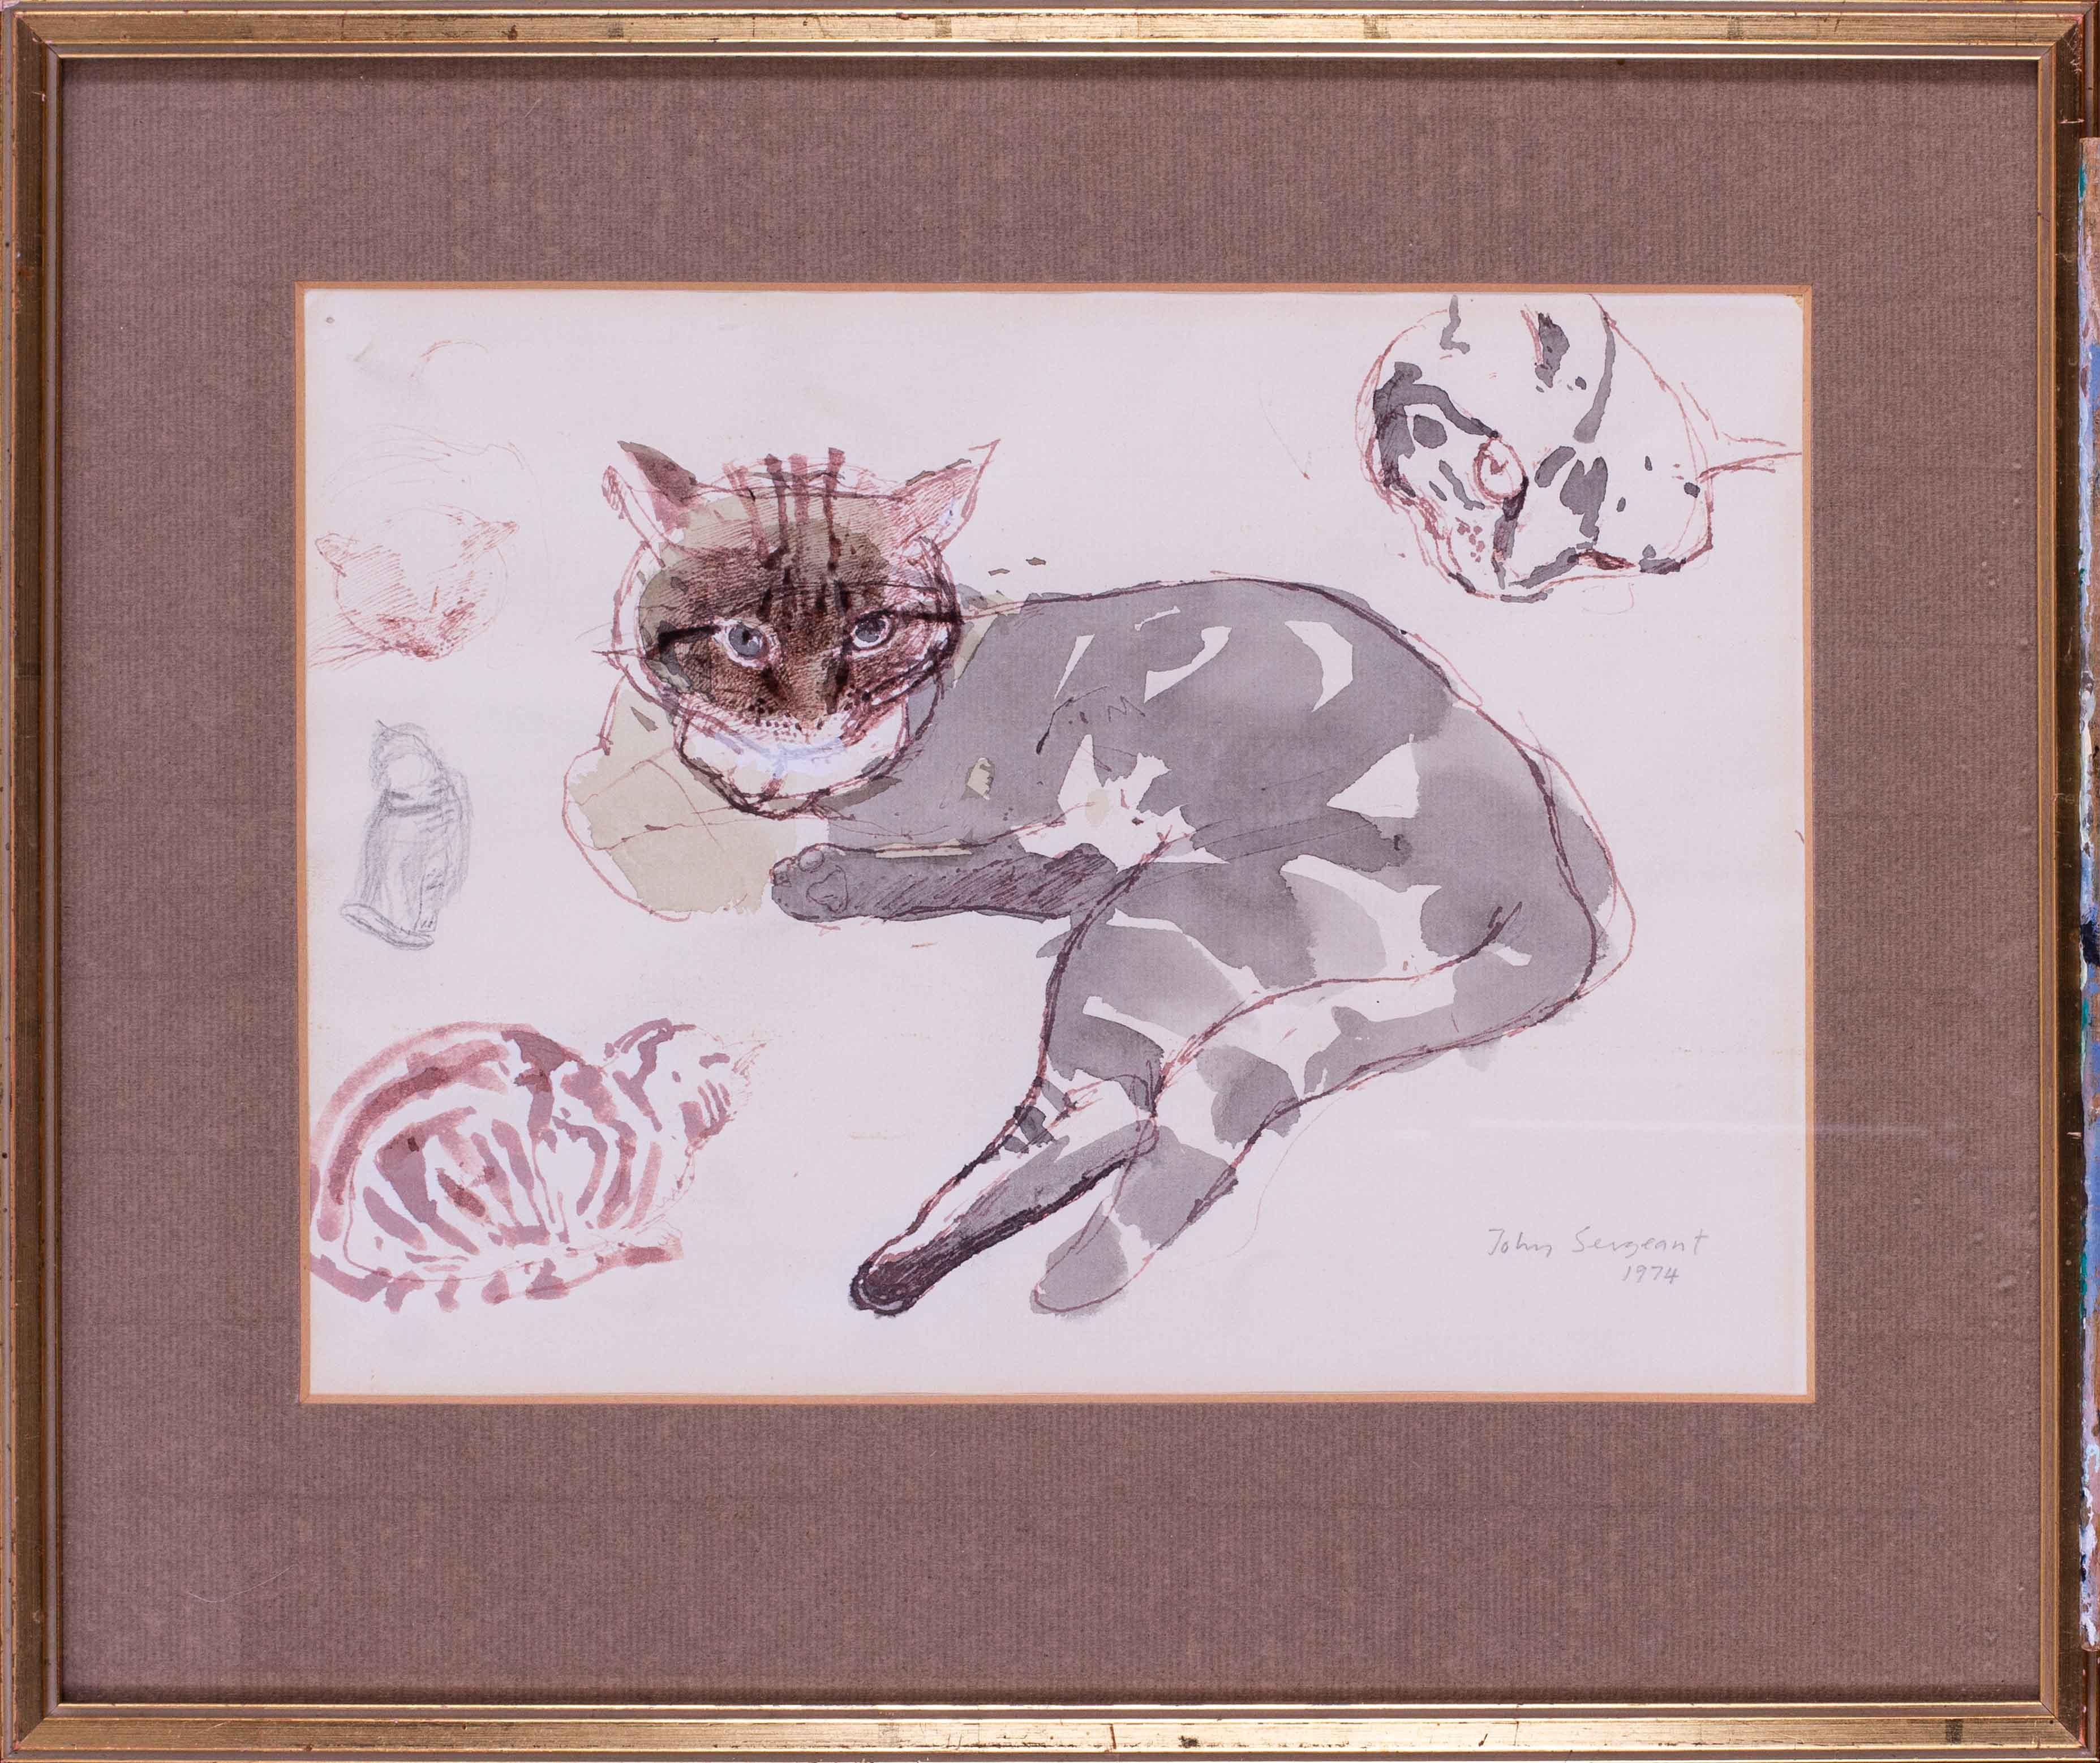 'Studies of a tabby cat', mixed media on paper by British artist John Sergeant